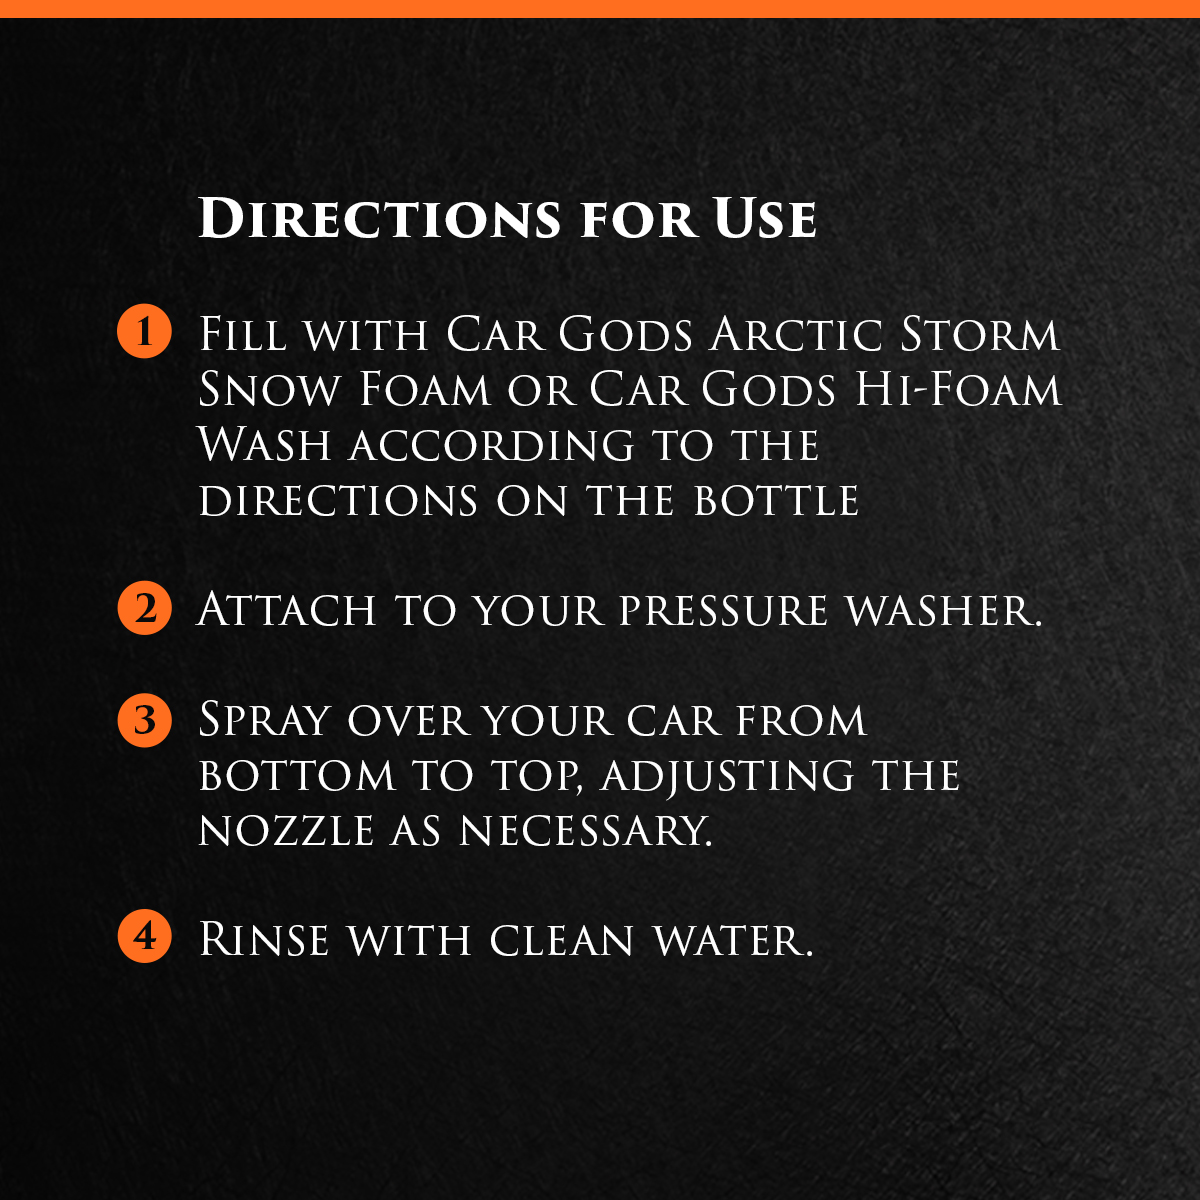 Image shows Car Gods Snow Foam Cannon being attached to pressure washer.